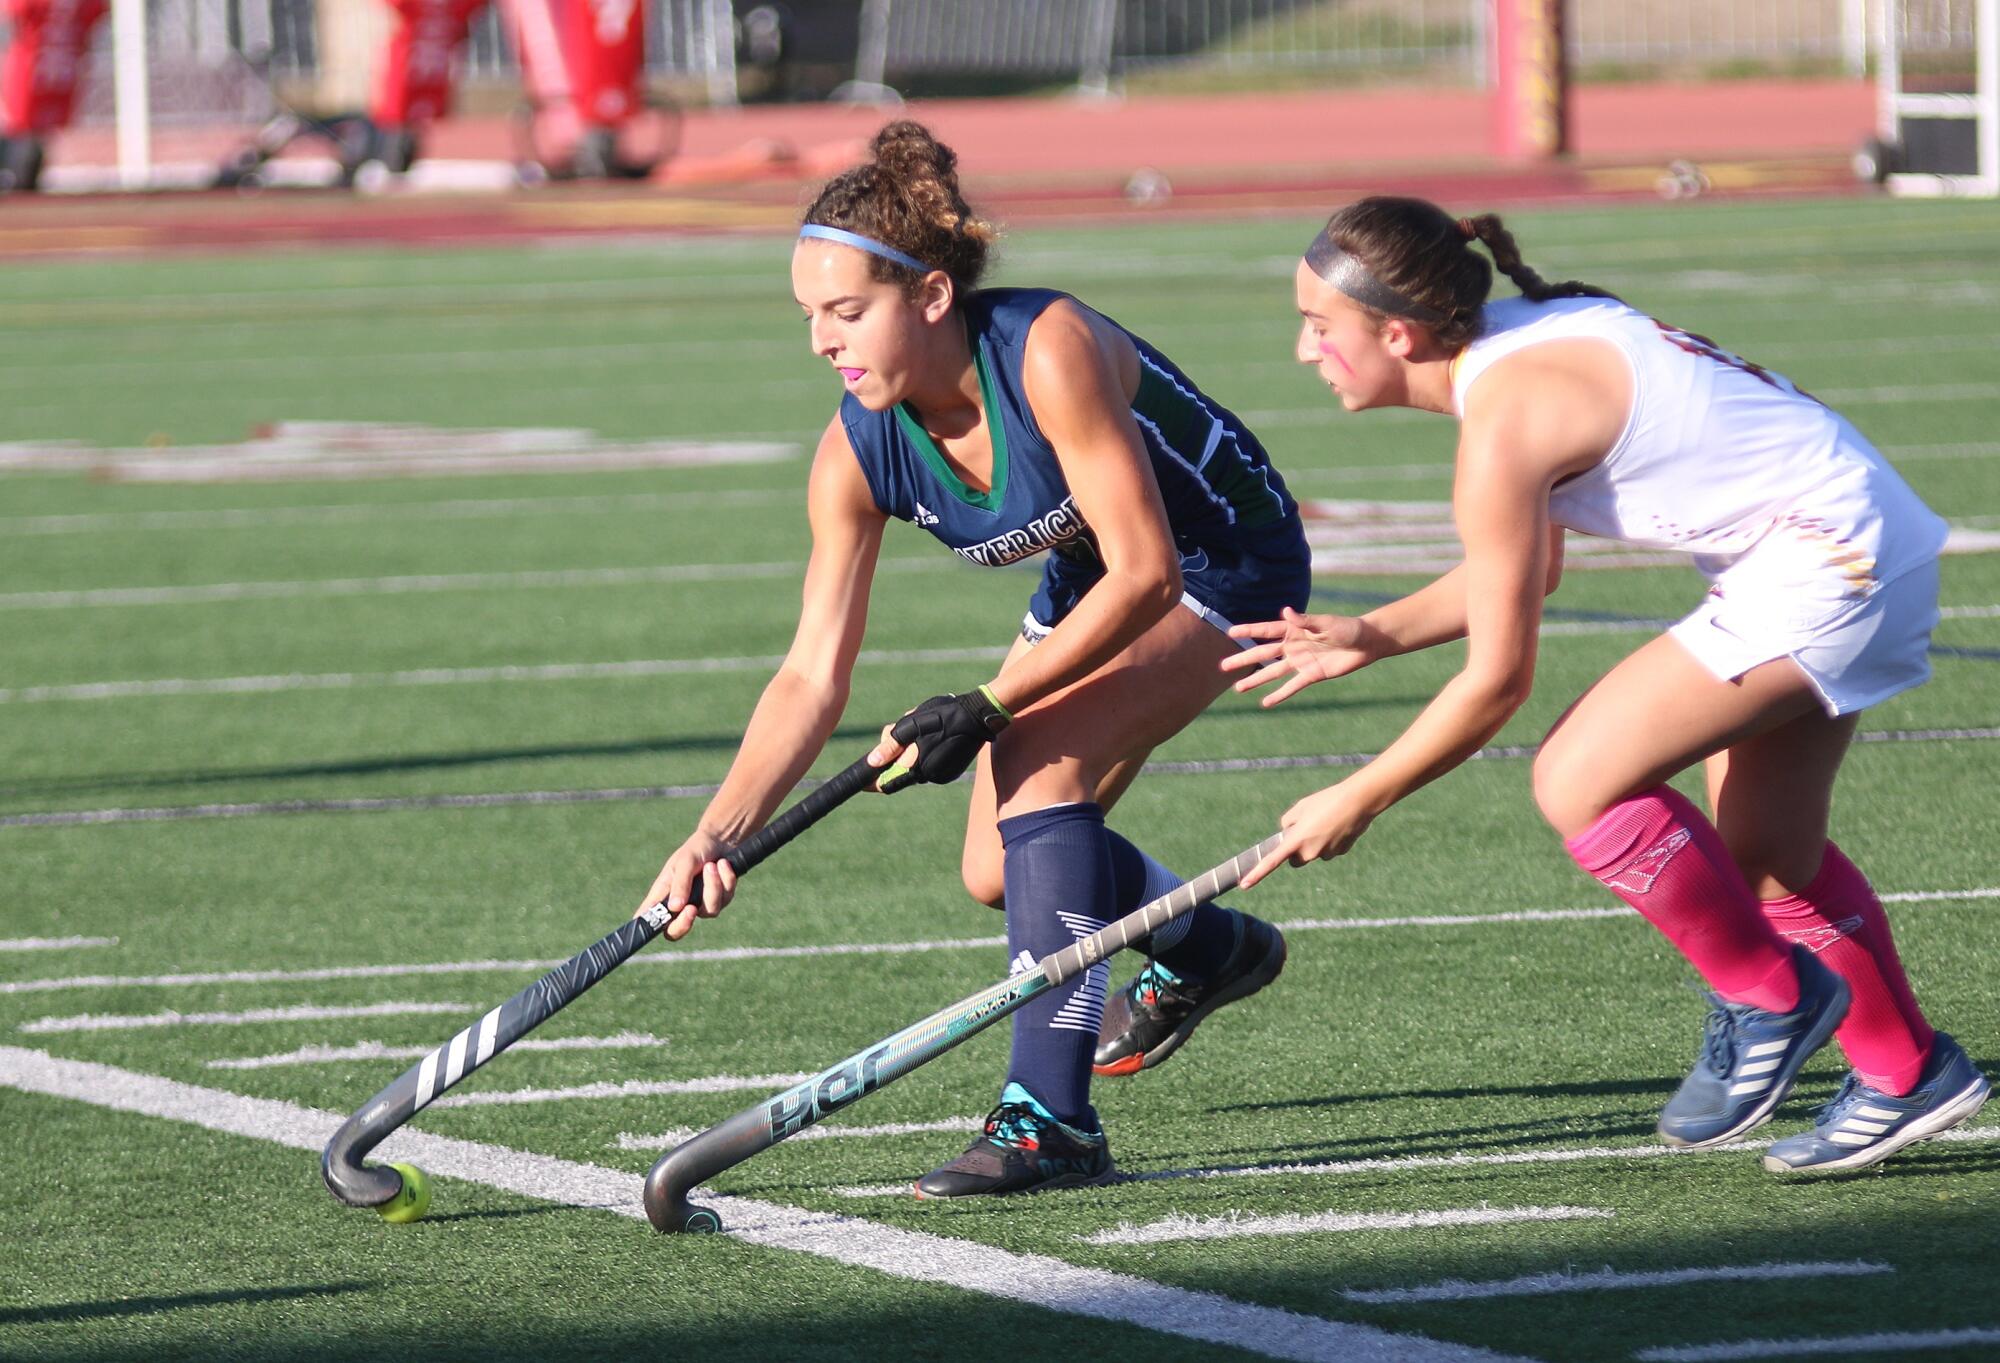 Midfielder Mia DiGiulio is ranked among the nation's best field hockey players by MaxPreps.com.